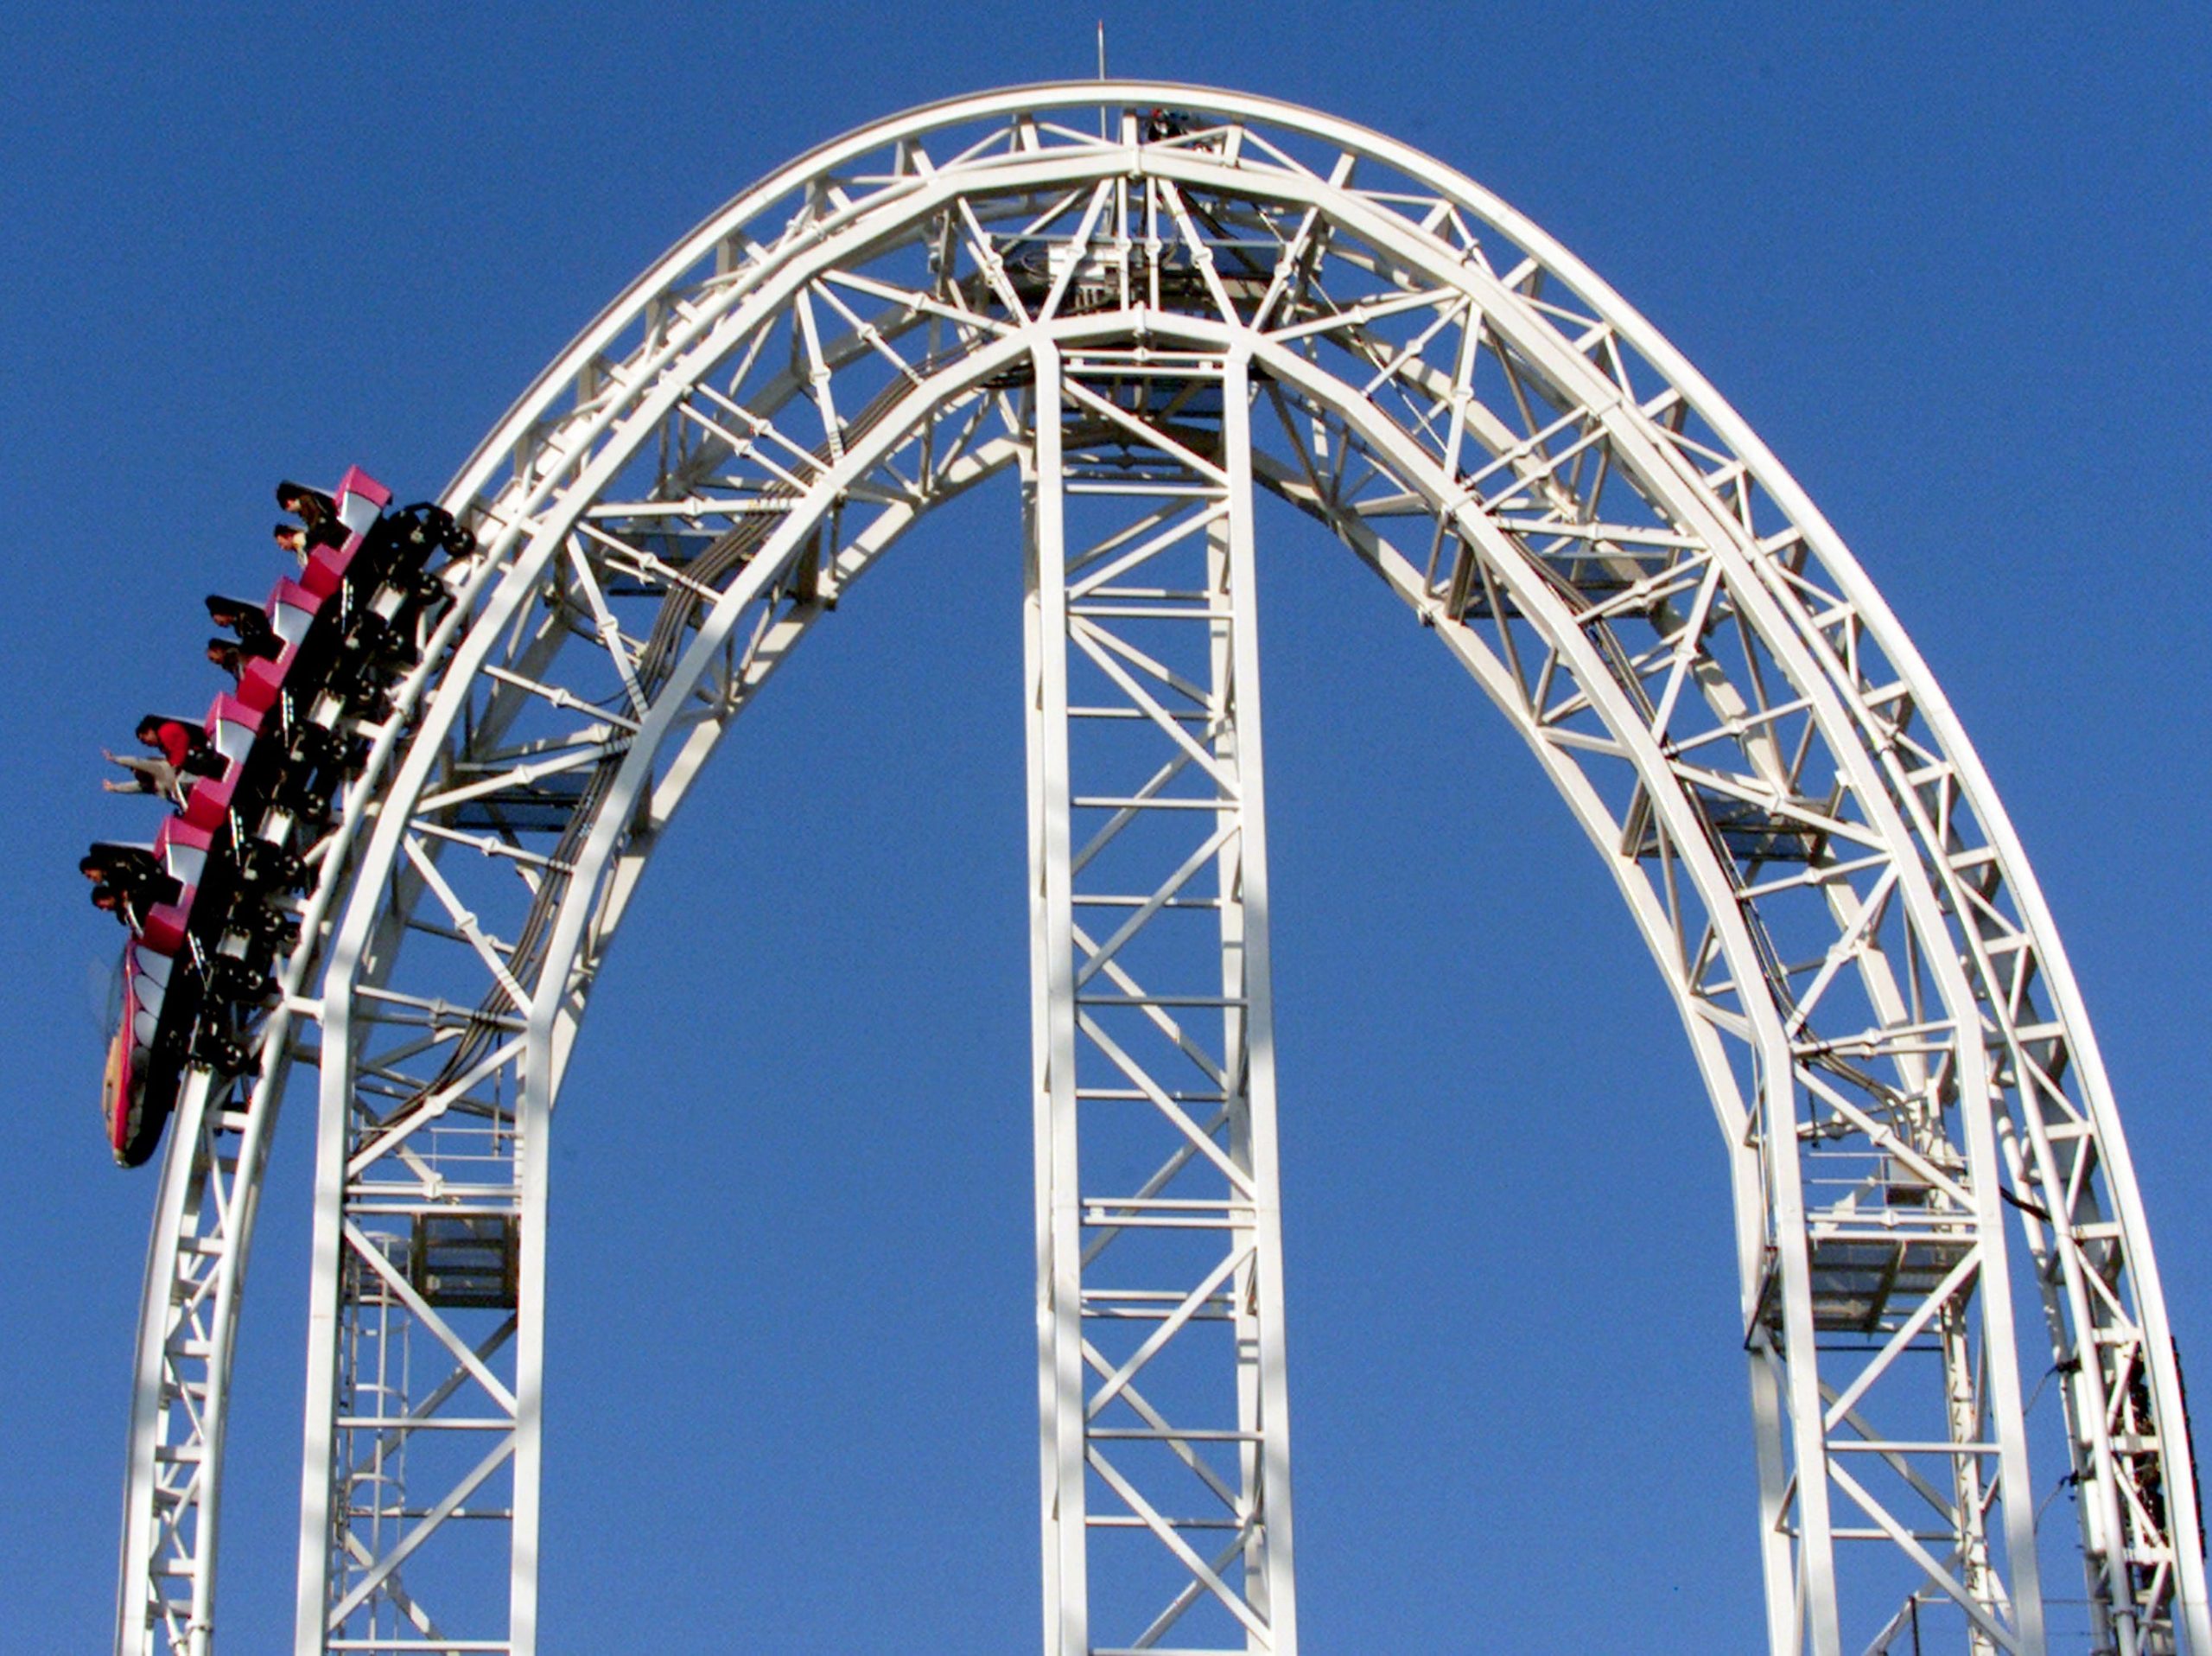 Daring Japanese guests speed down a 156-foot drop as they enjoy what is claimed to be the world's fastest rollercoaster, called "Dodonpa," at the Fujikyu Highland amusement park in Fuji-Yosida, west of Tokyo.